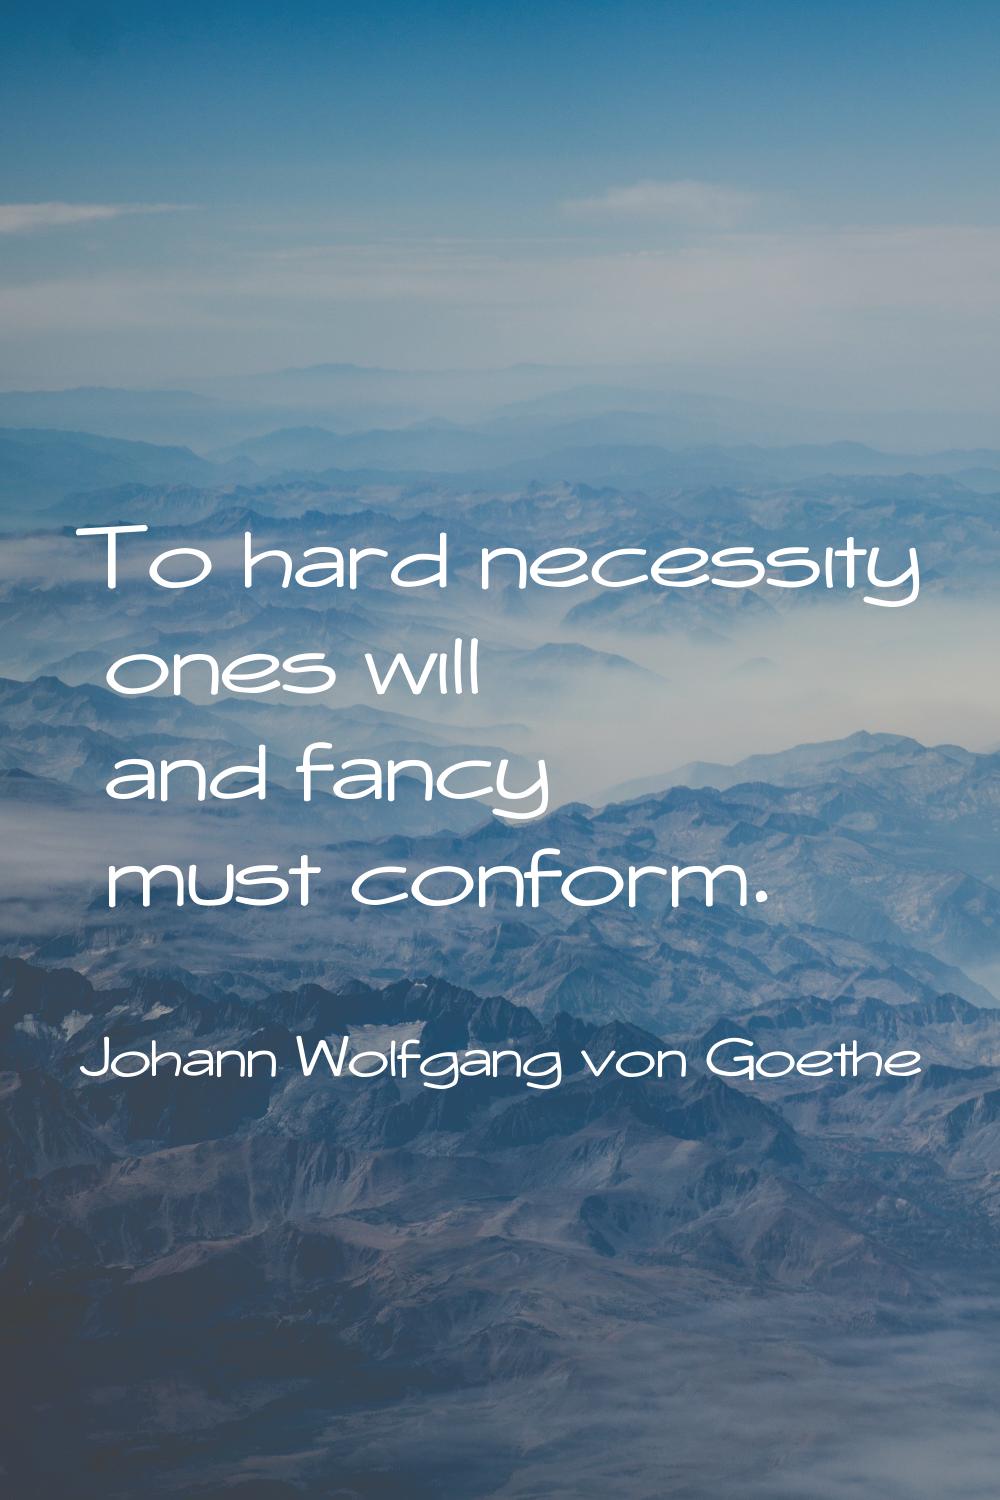 To hard necessity ones will and fancy must conform.